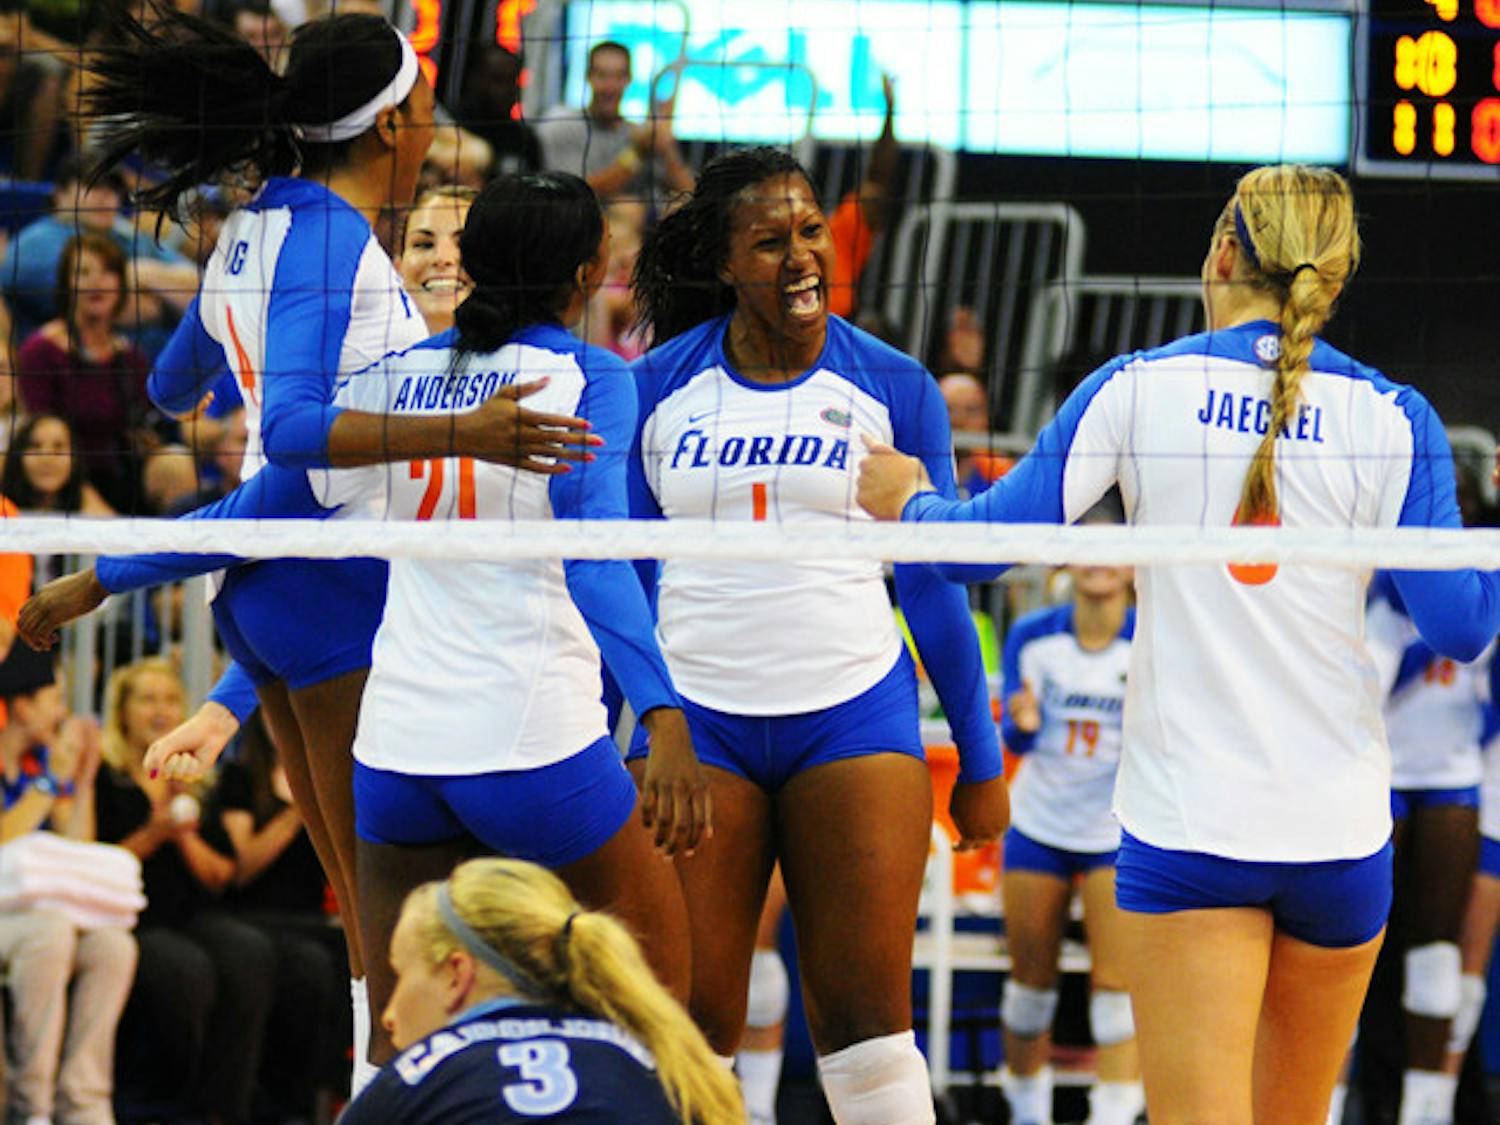 Senior outside setter Stephanie Ferrell had 20 kills and hit .381 during the Gators’ home tournament this weekend. She earned the Most Valuable Player Award.